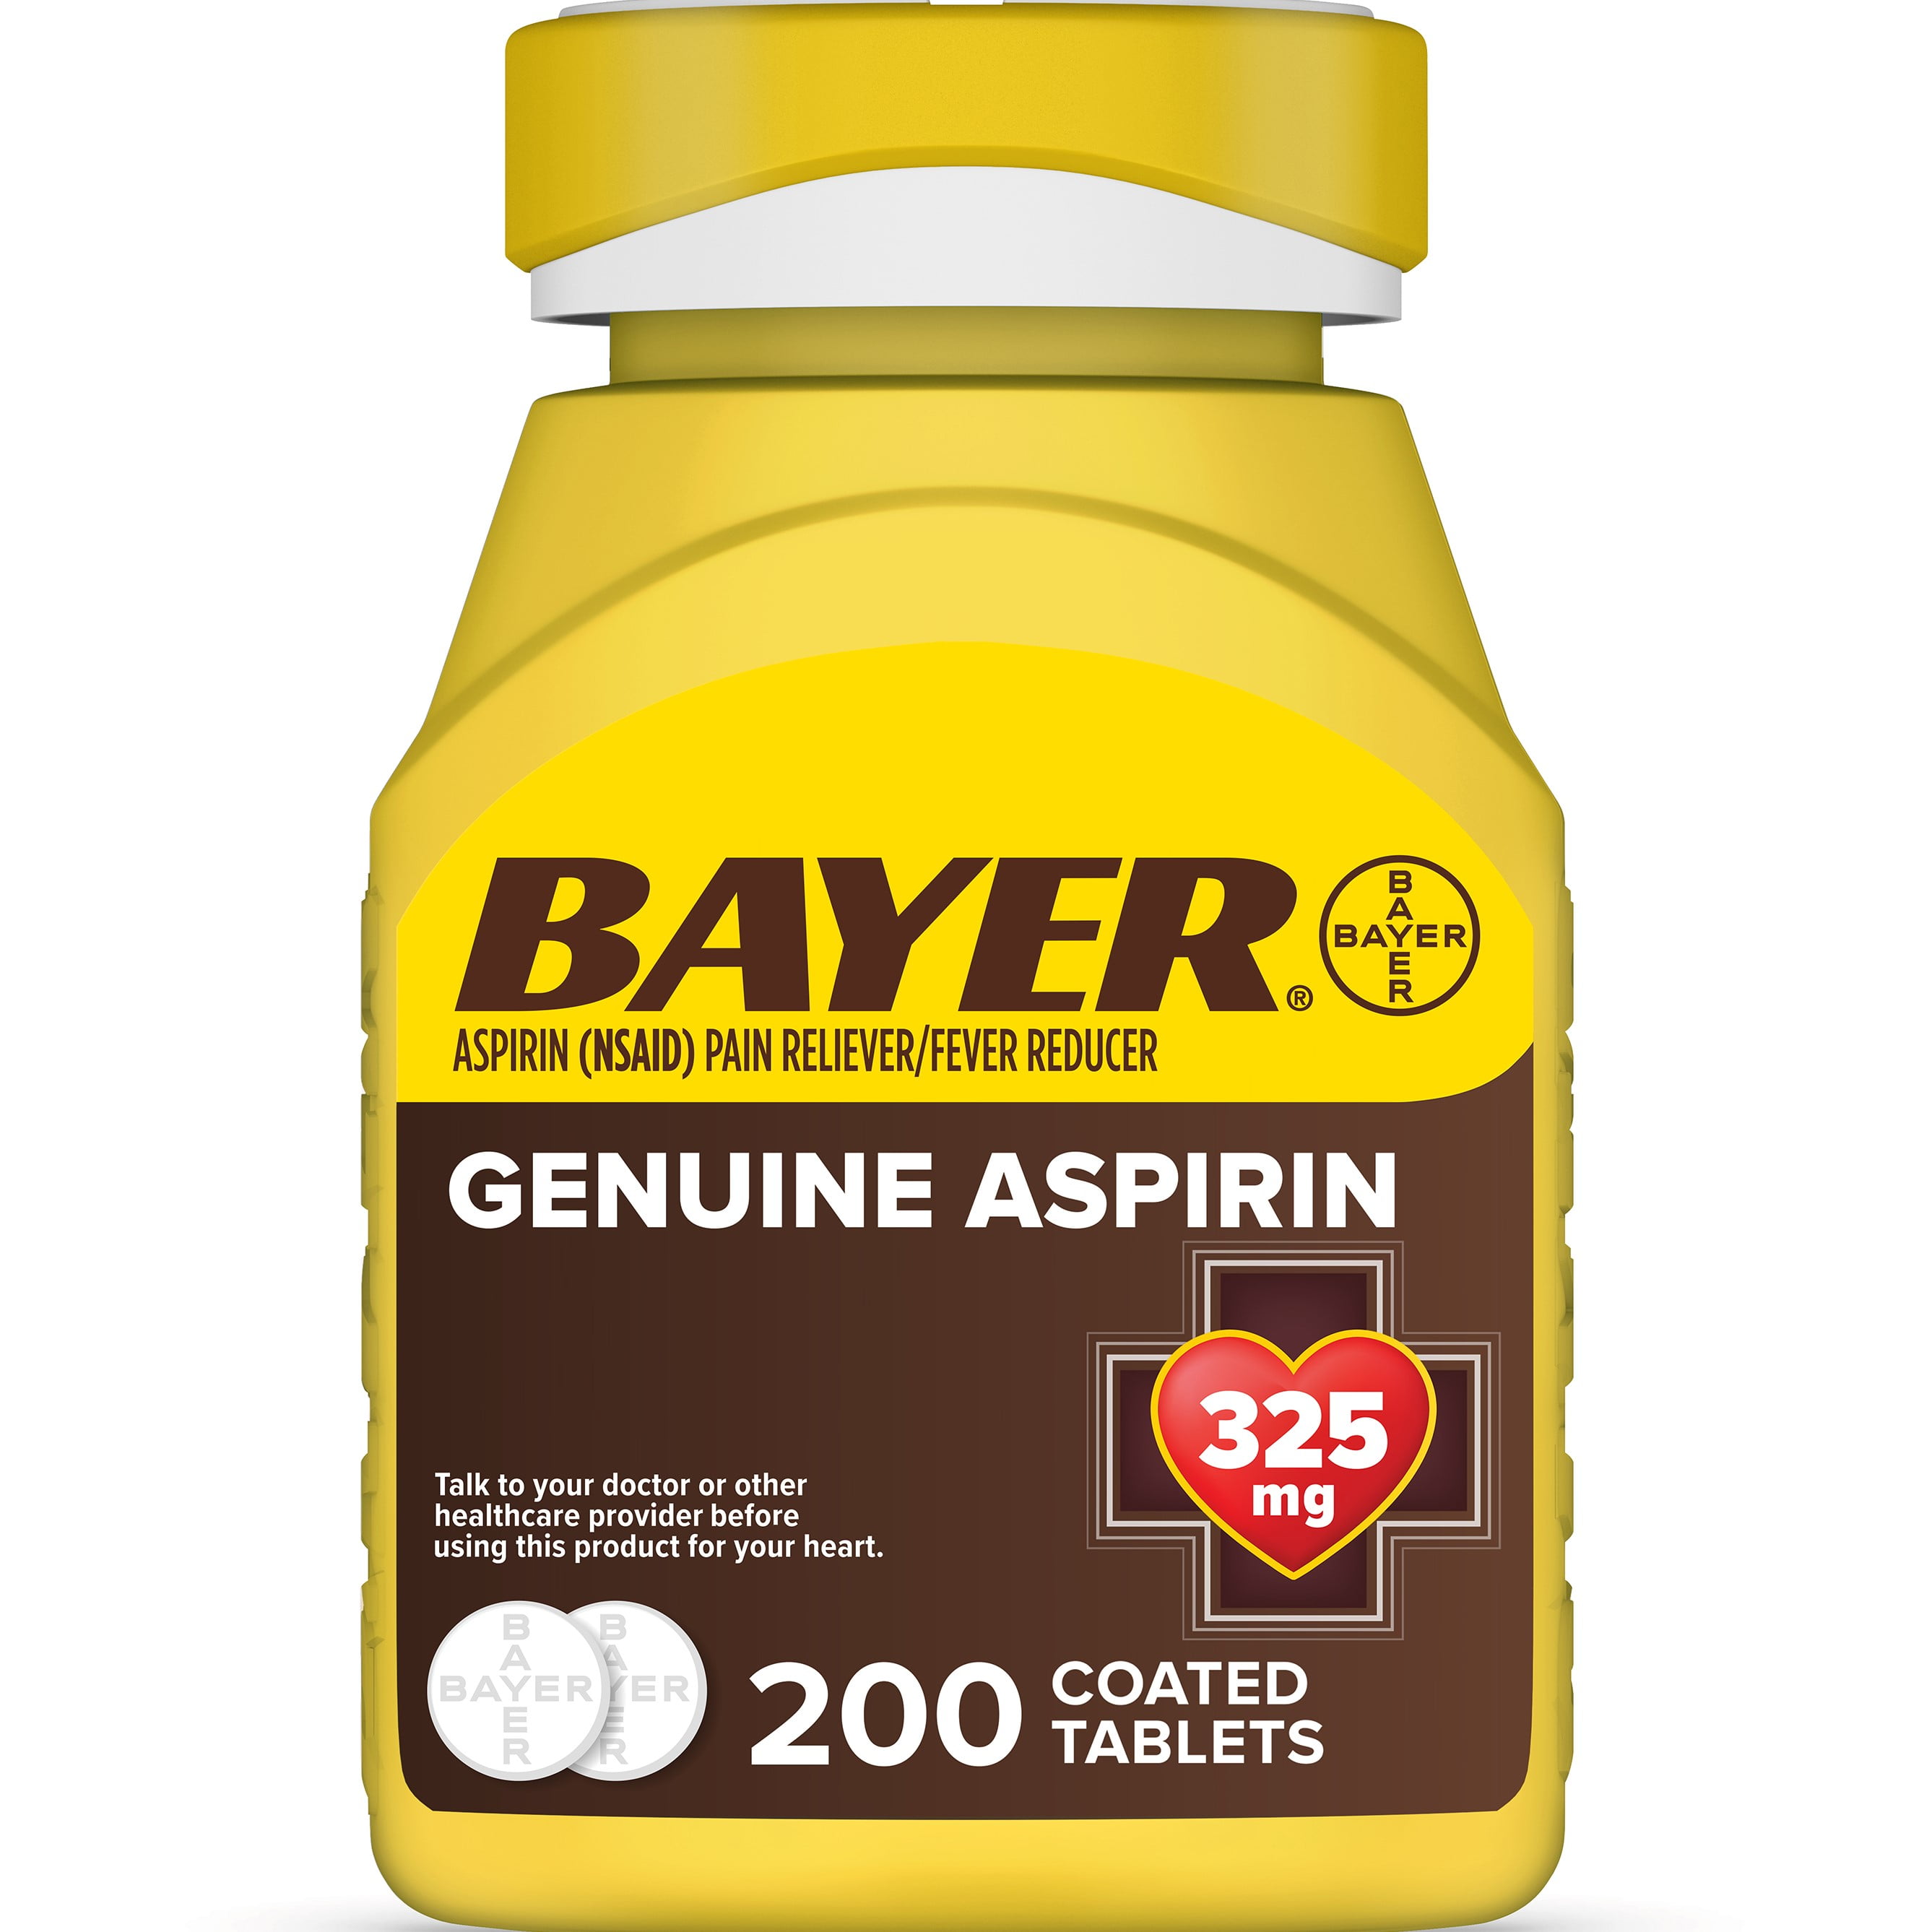 Genuine Bayer Aspirin Pain Reliever/Fever Reducer Coated Tablets, 325 mg, 200 ct